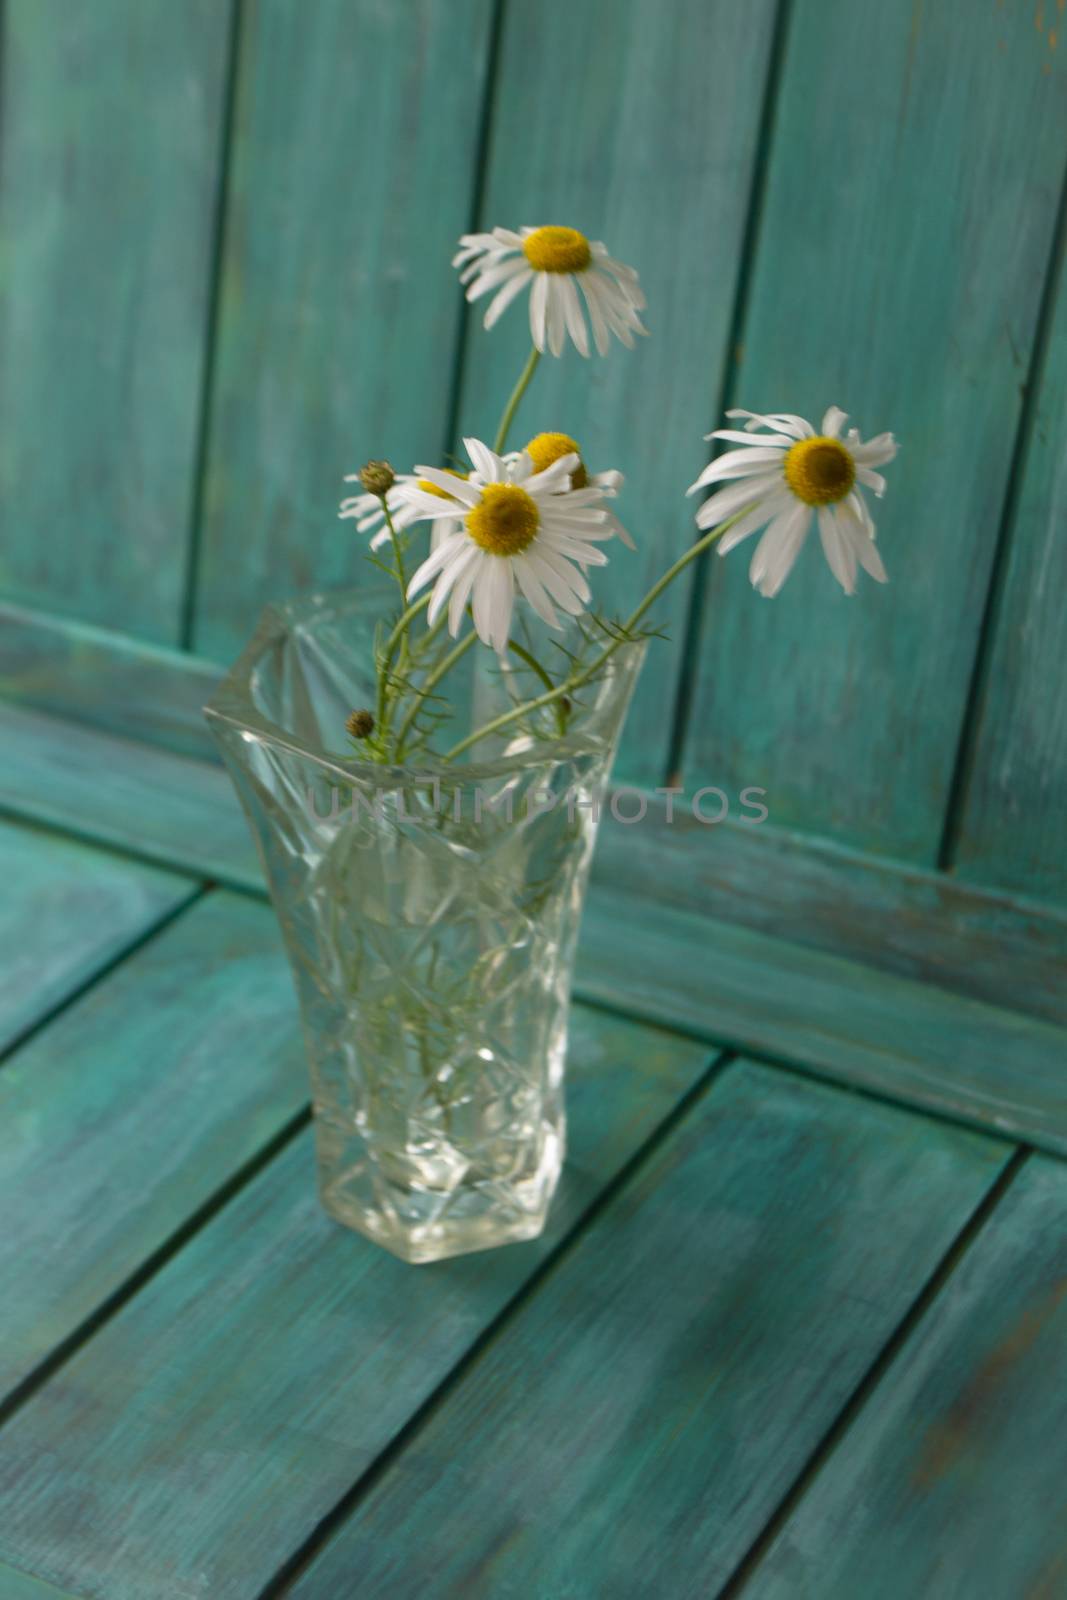 Bouquet of field daisies or camomile in a vase on turquoise background